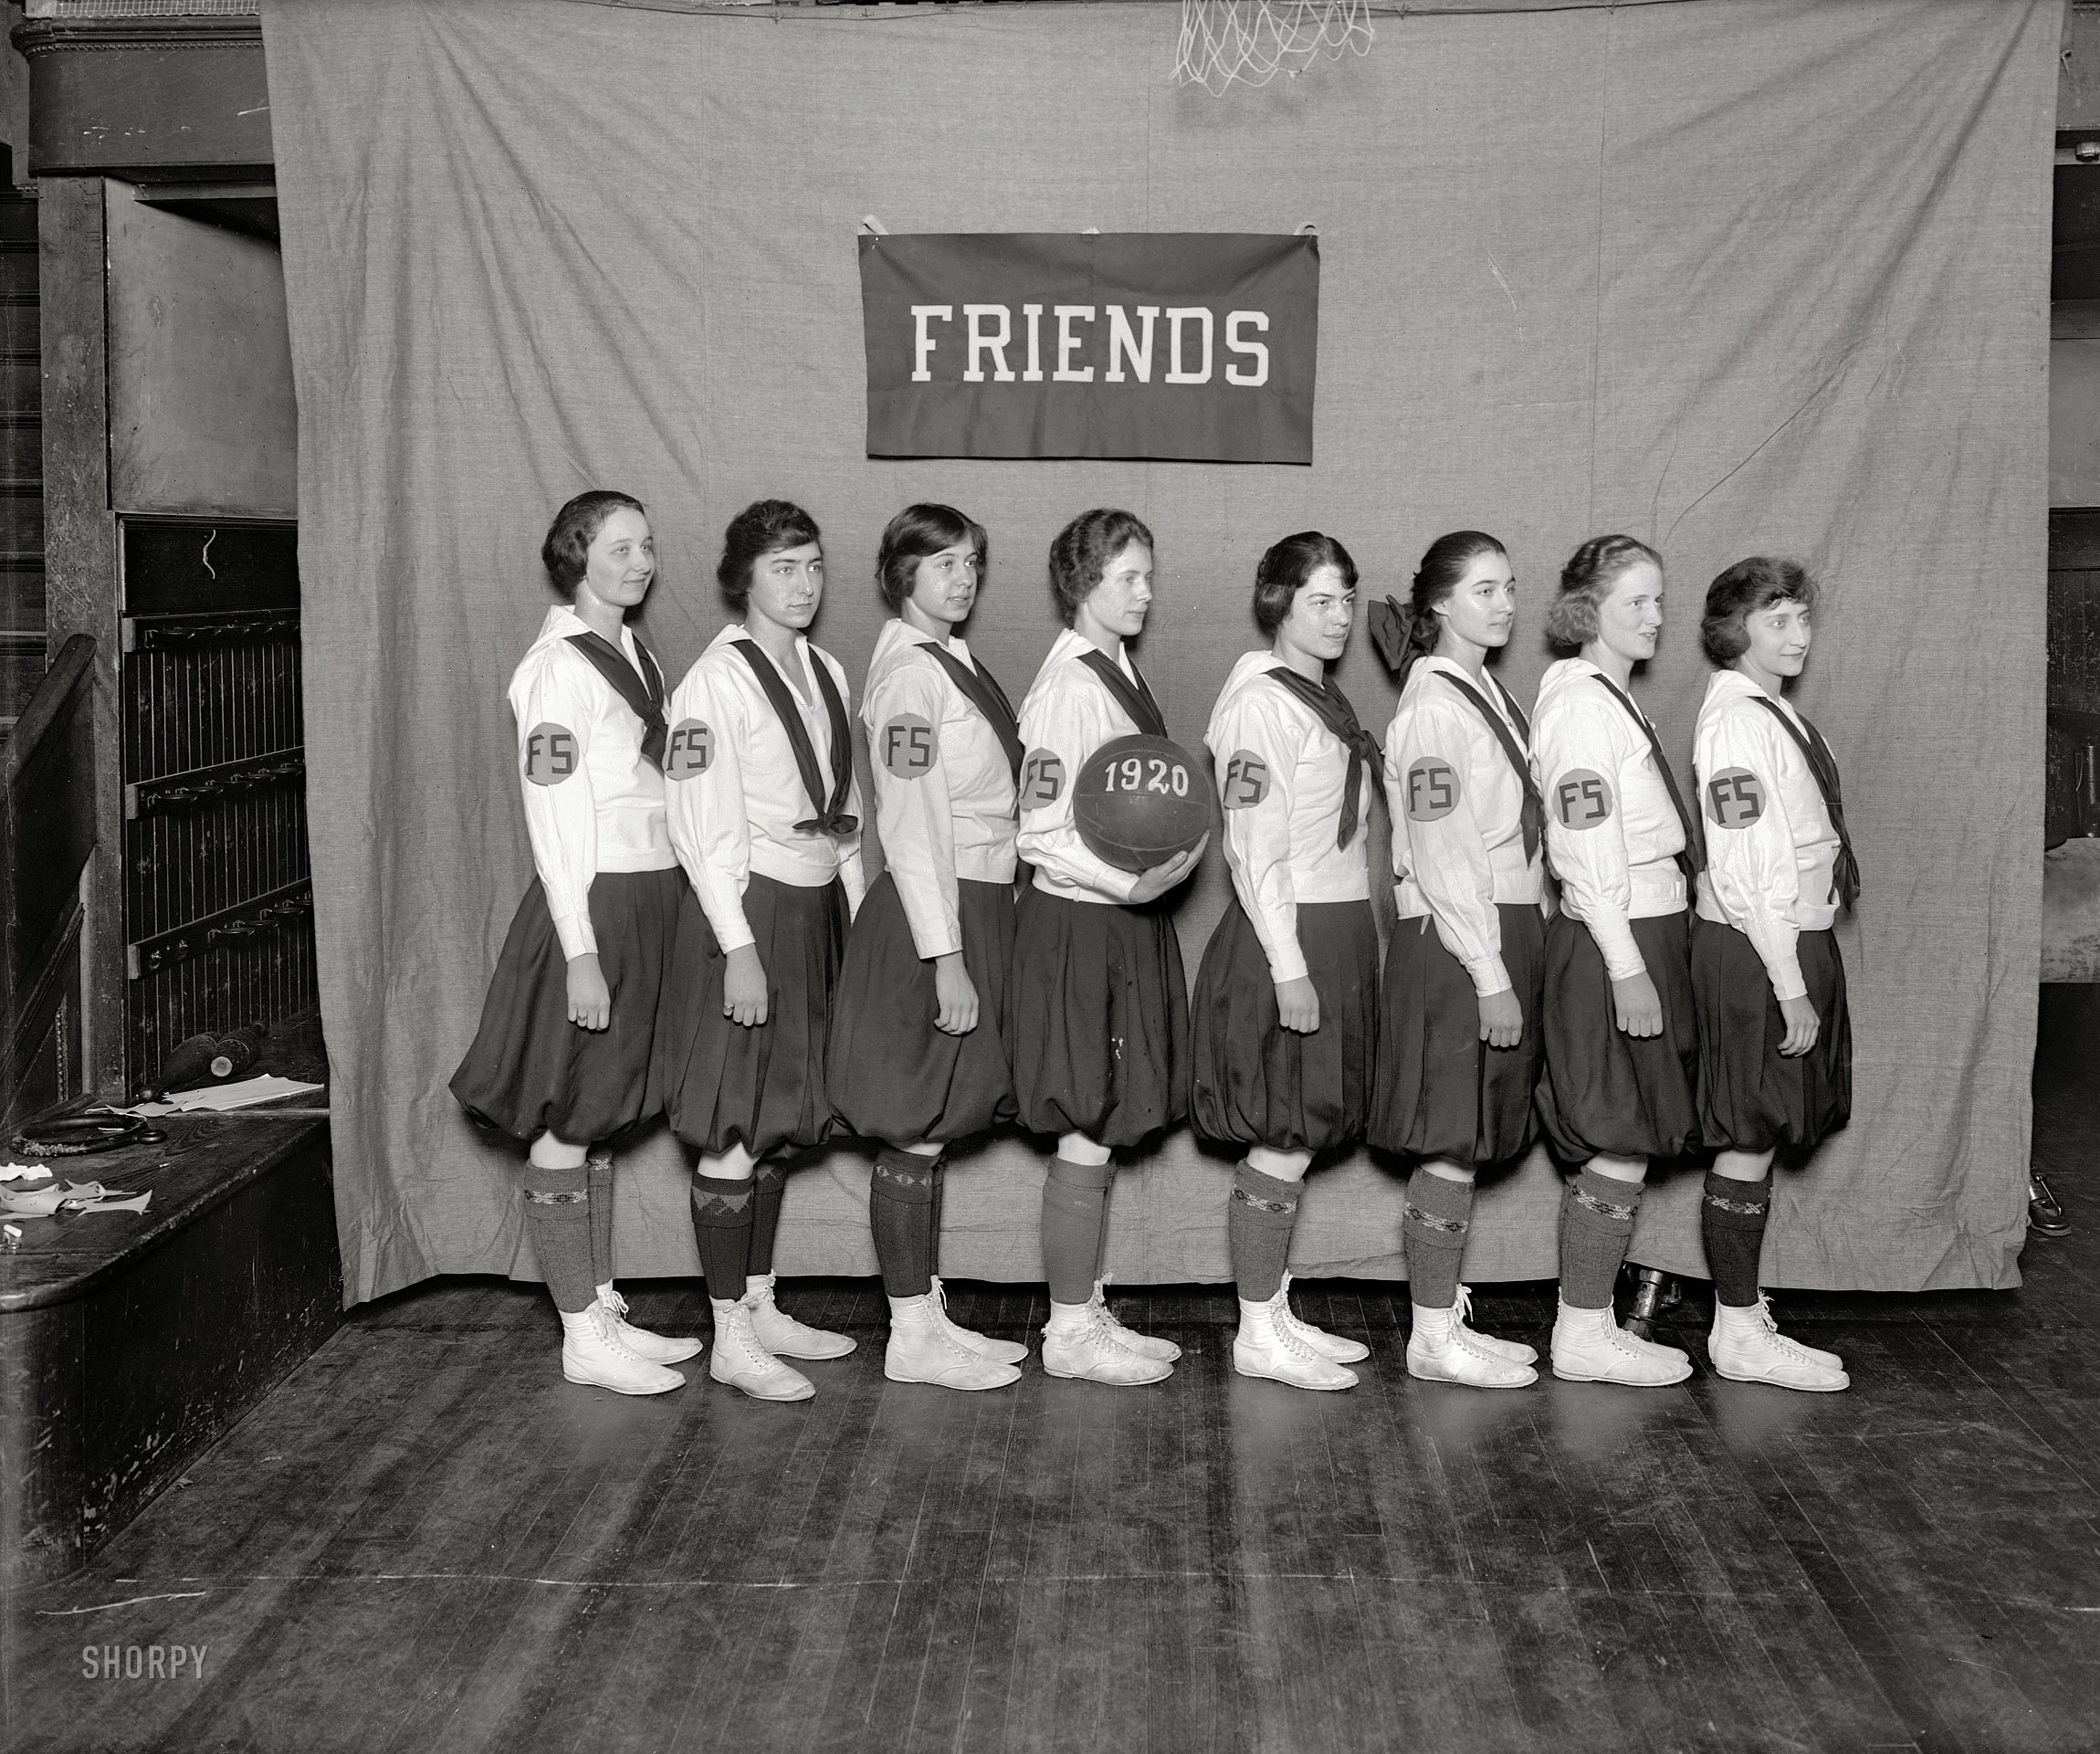 Washington, D.C., circa 1920. "Friends Select School basketball team." National Photo Company Collection glass negative. View full size.